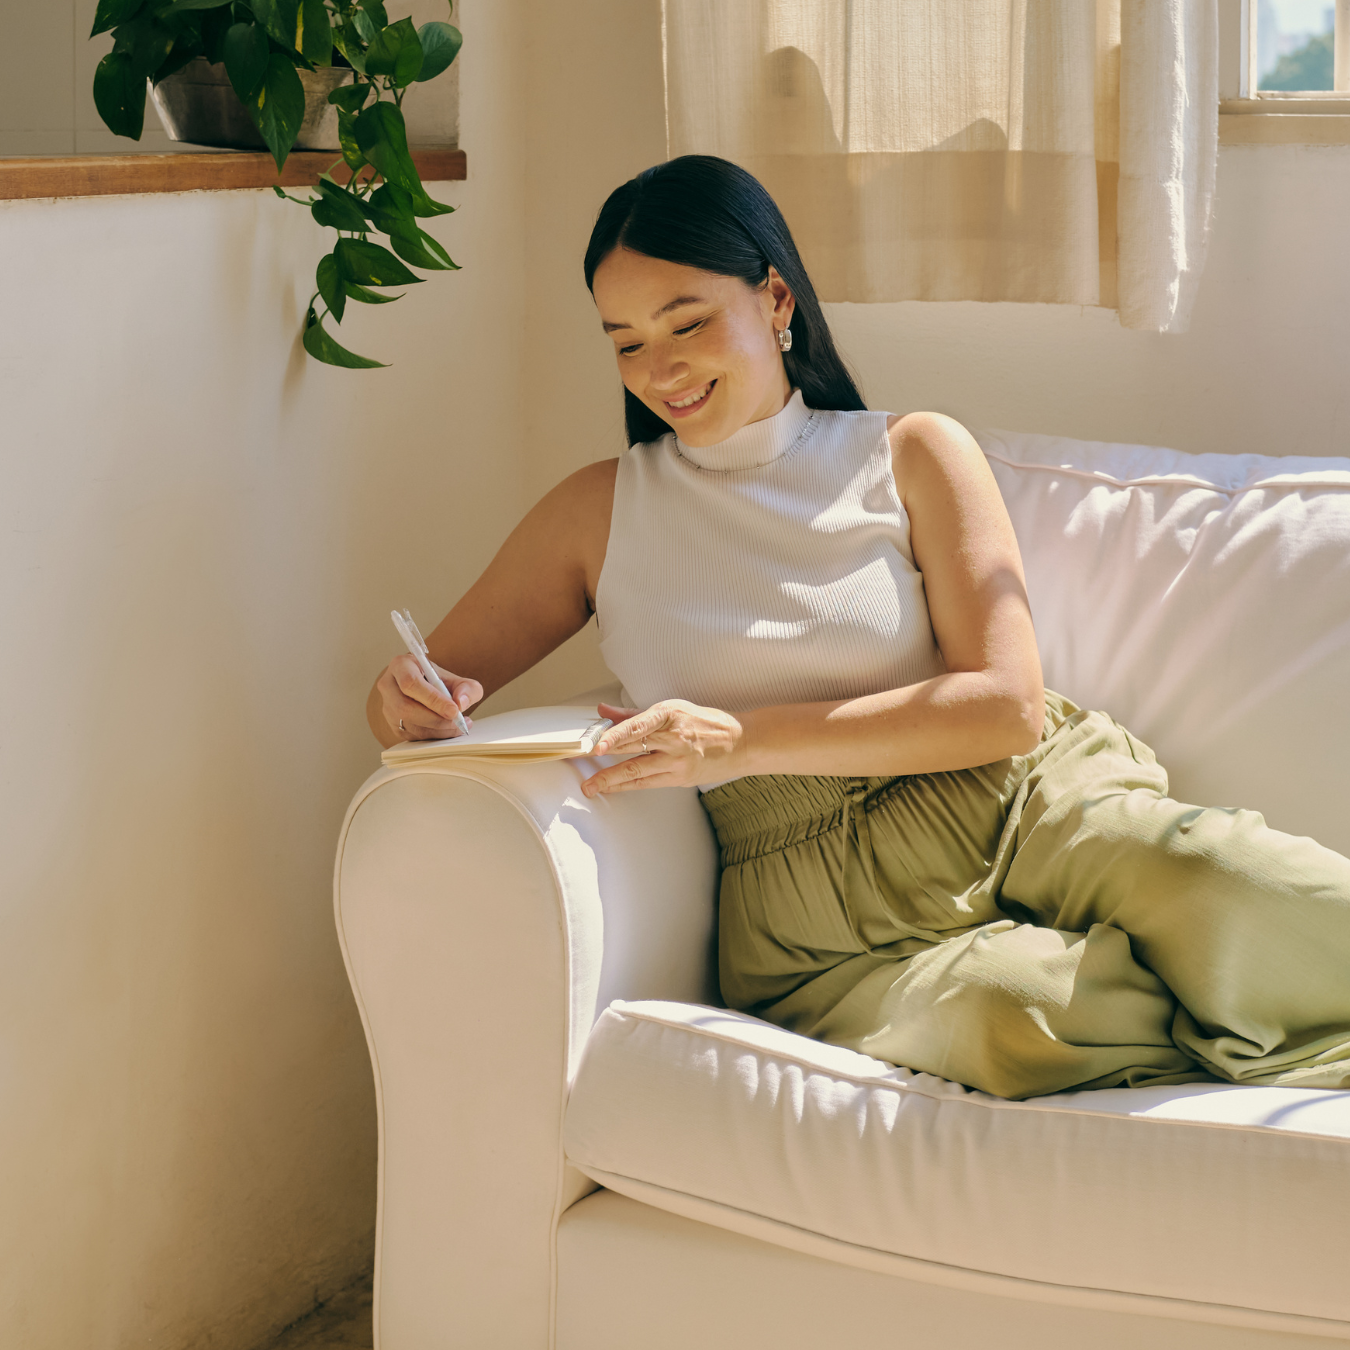 Woman writing taking time for mindfulness